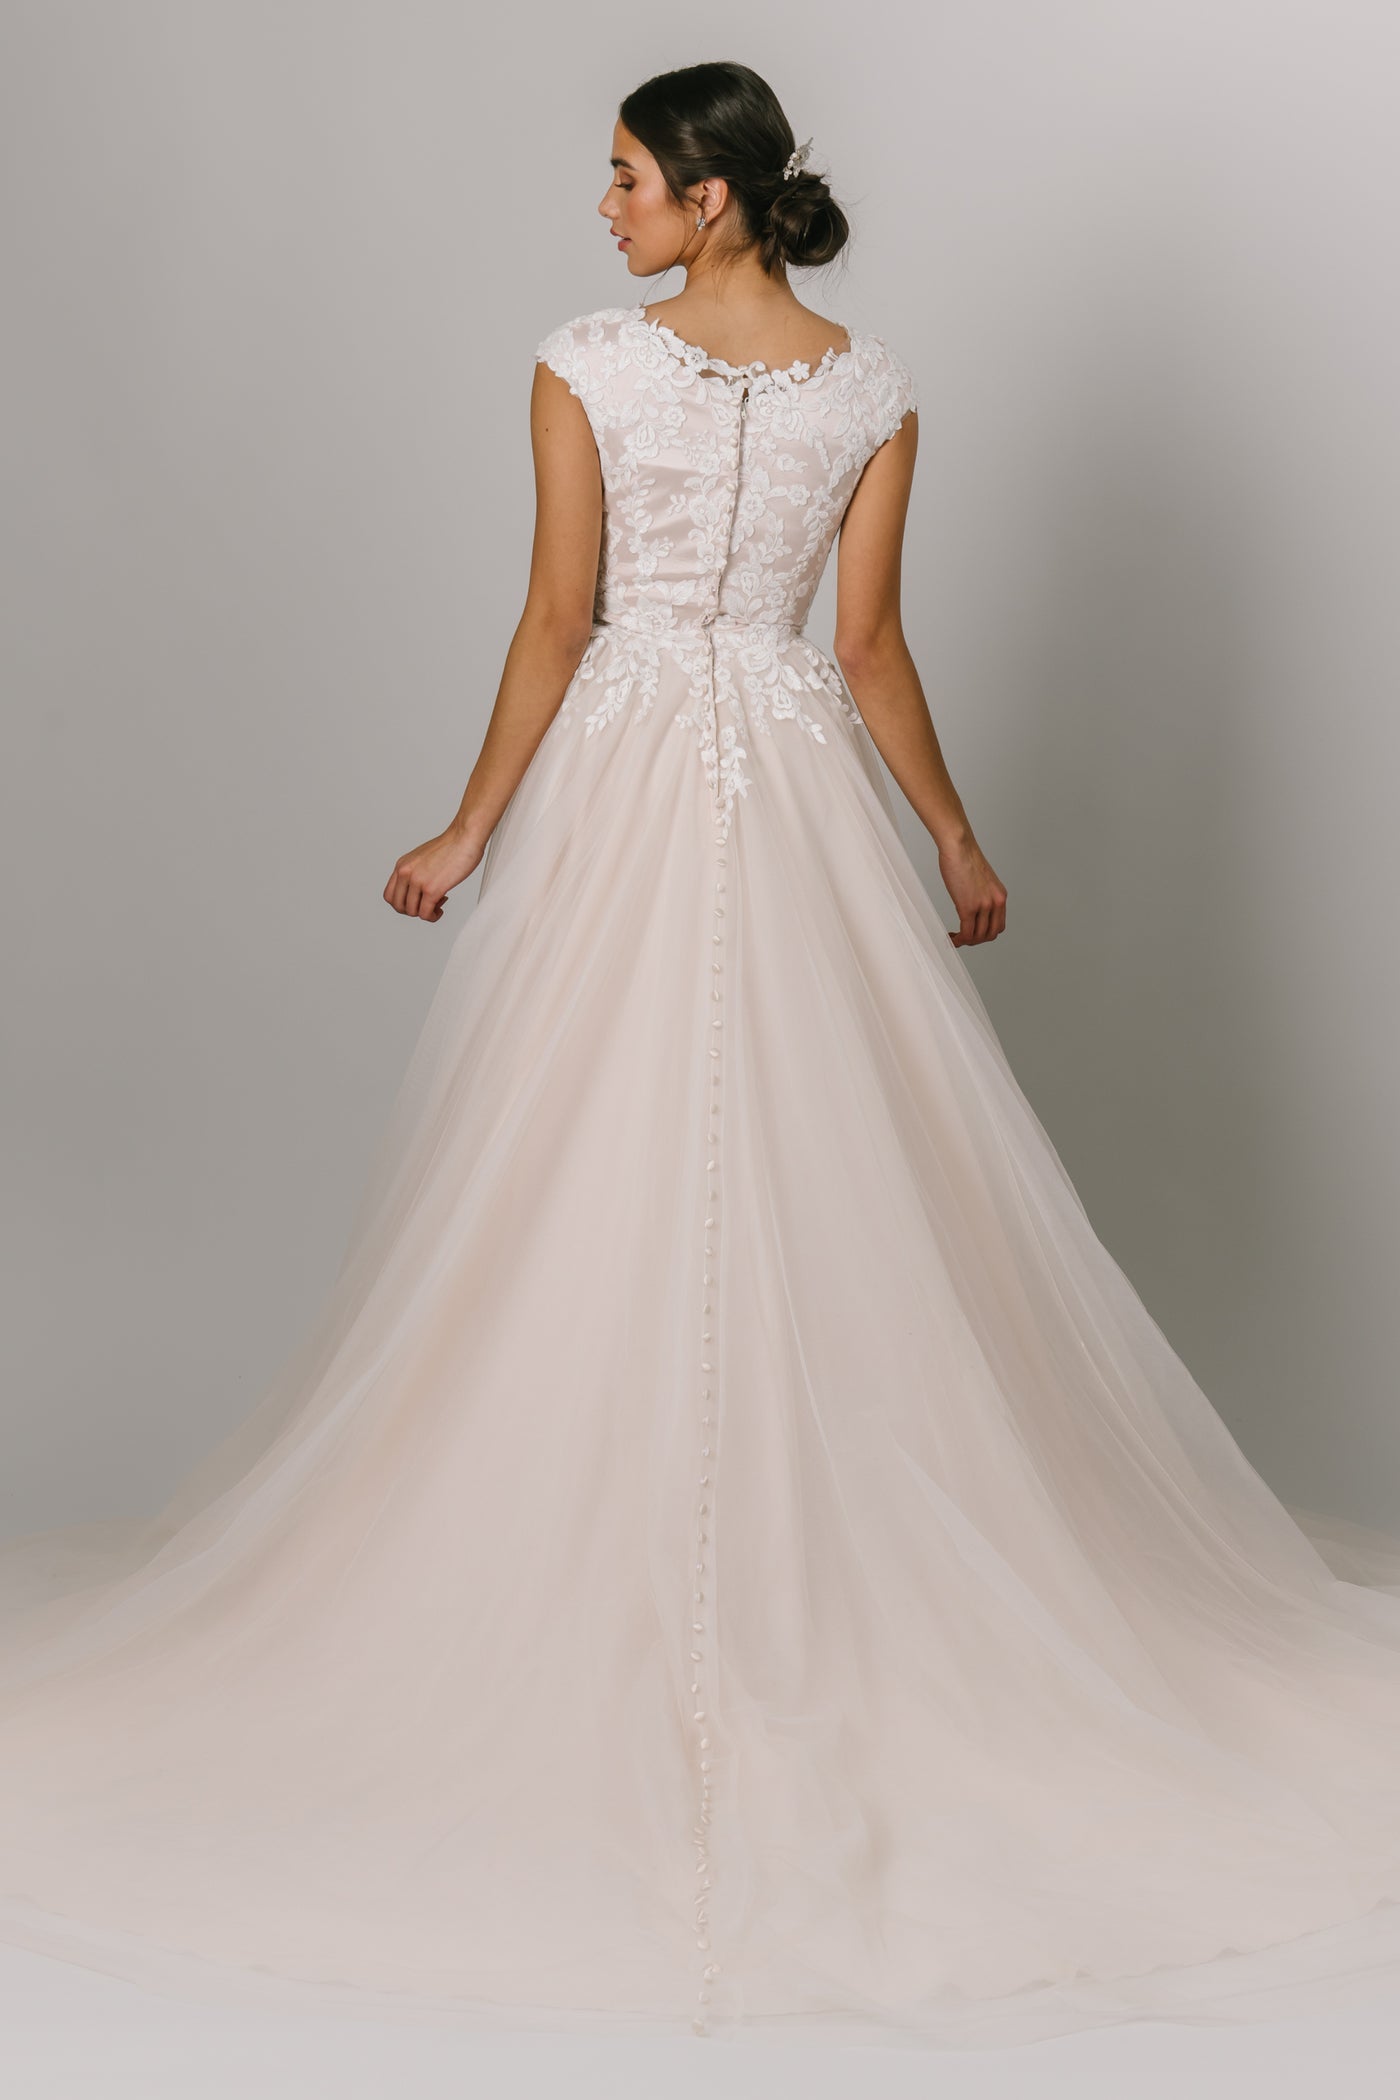 We love this Modest Wedding Dress featuring a lace bodice, illusion neckline and ballgown skirt! - Modest Wedding Dresses - Modest Dresses - Modest Clothing - LatterDayBride